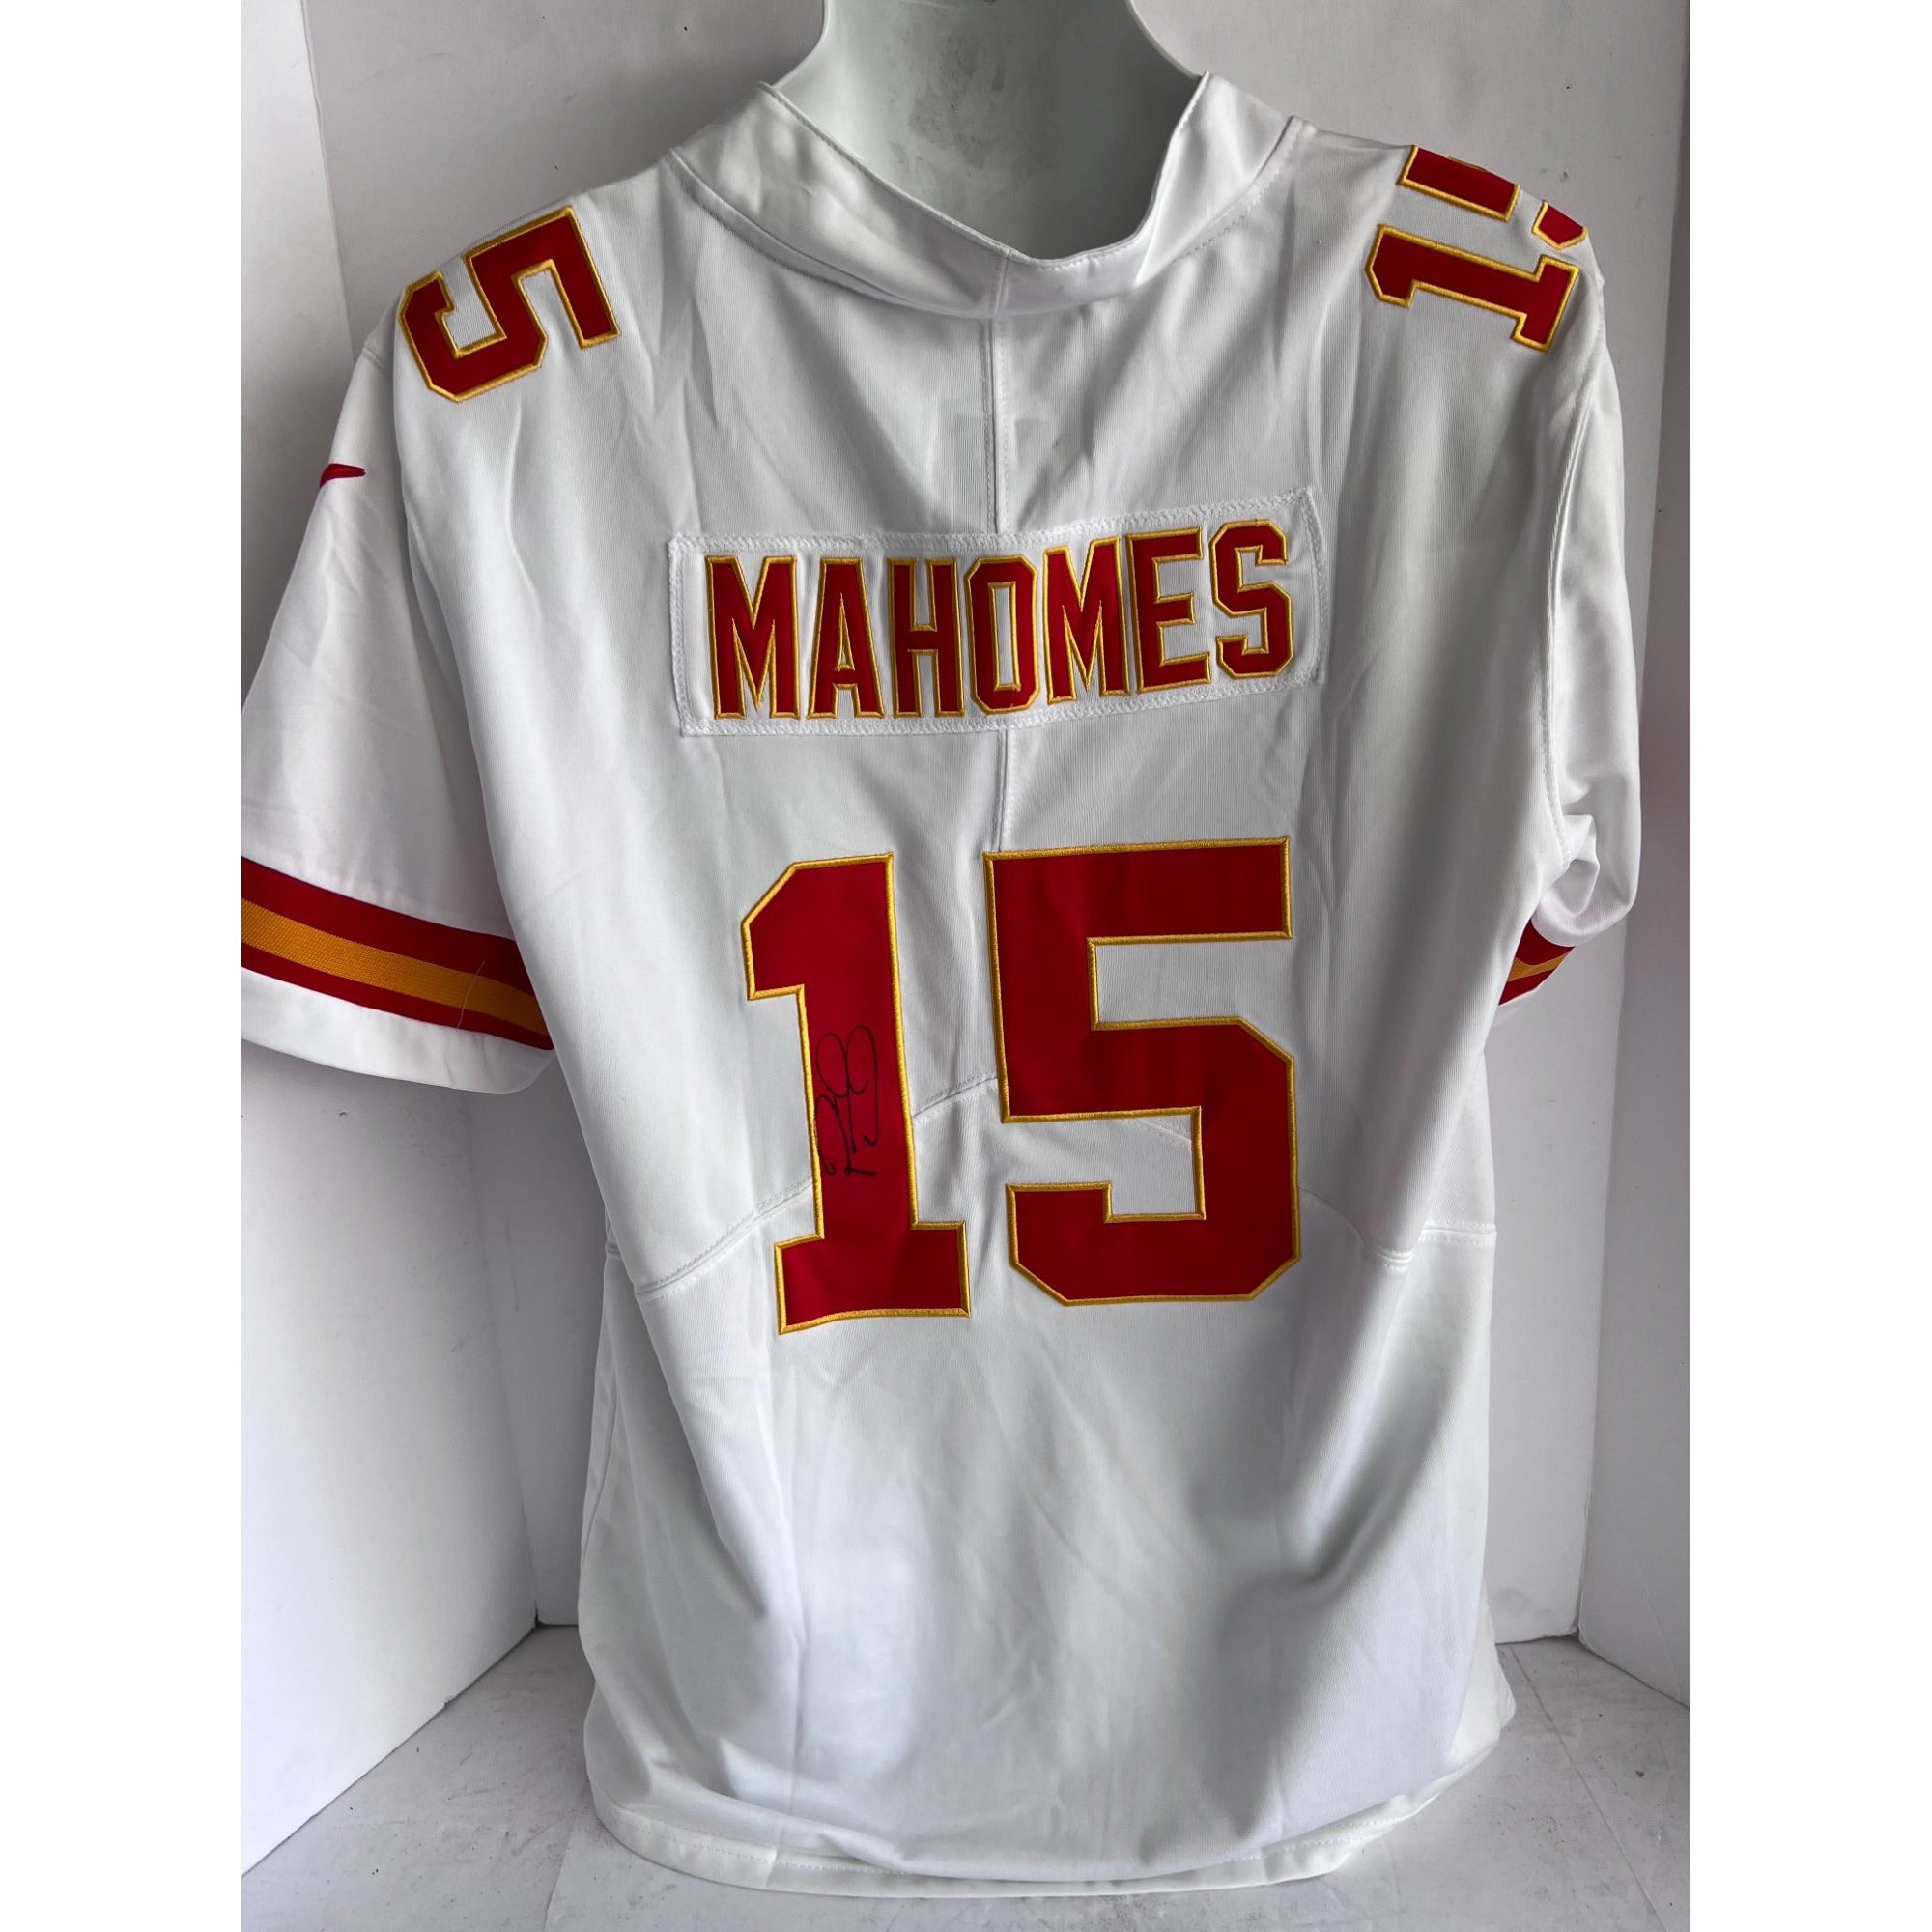 Patrick Mahomes Kansas City Chiefs game model jersey signed with proof